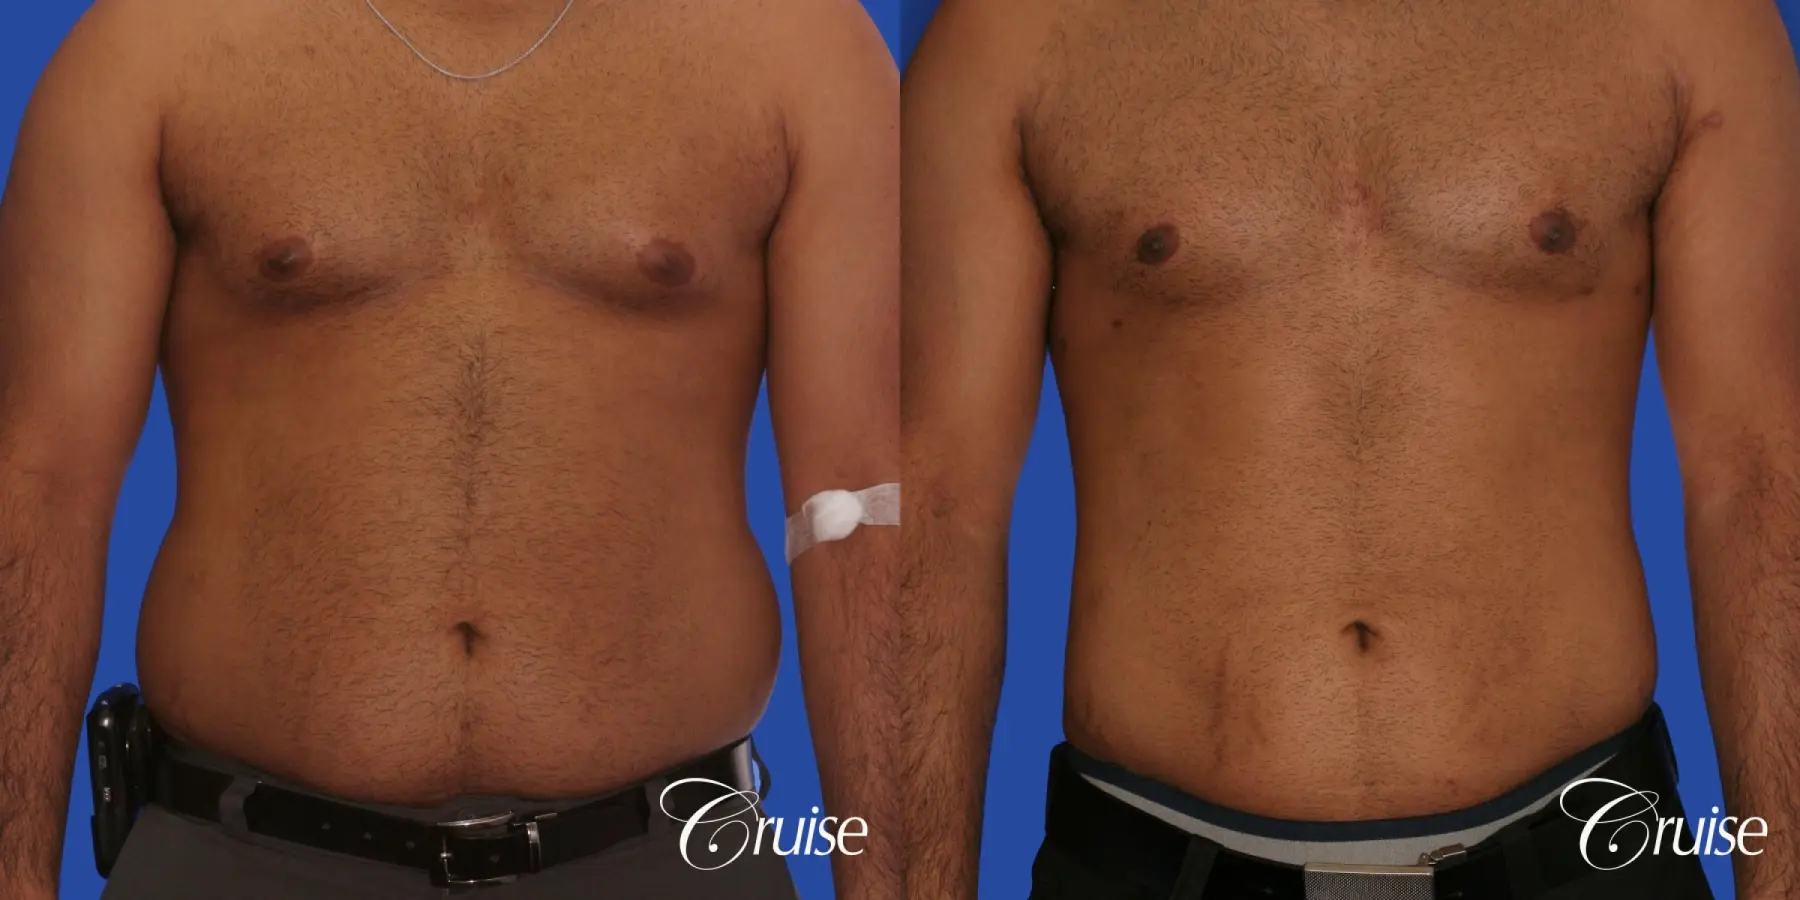 young adult with gyno gets gynecomastia surgery - Before and After 1